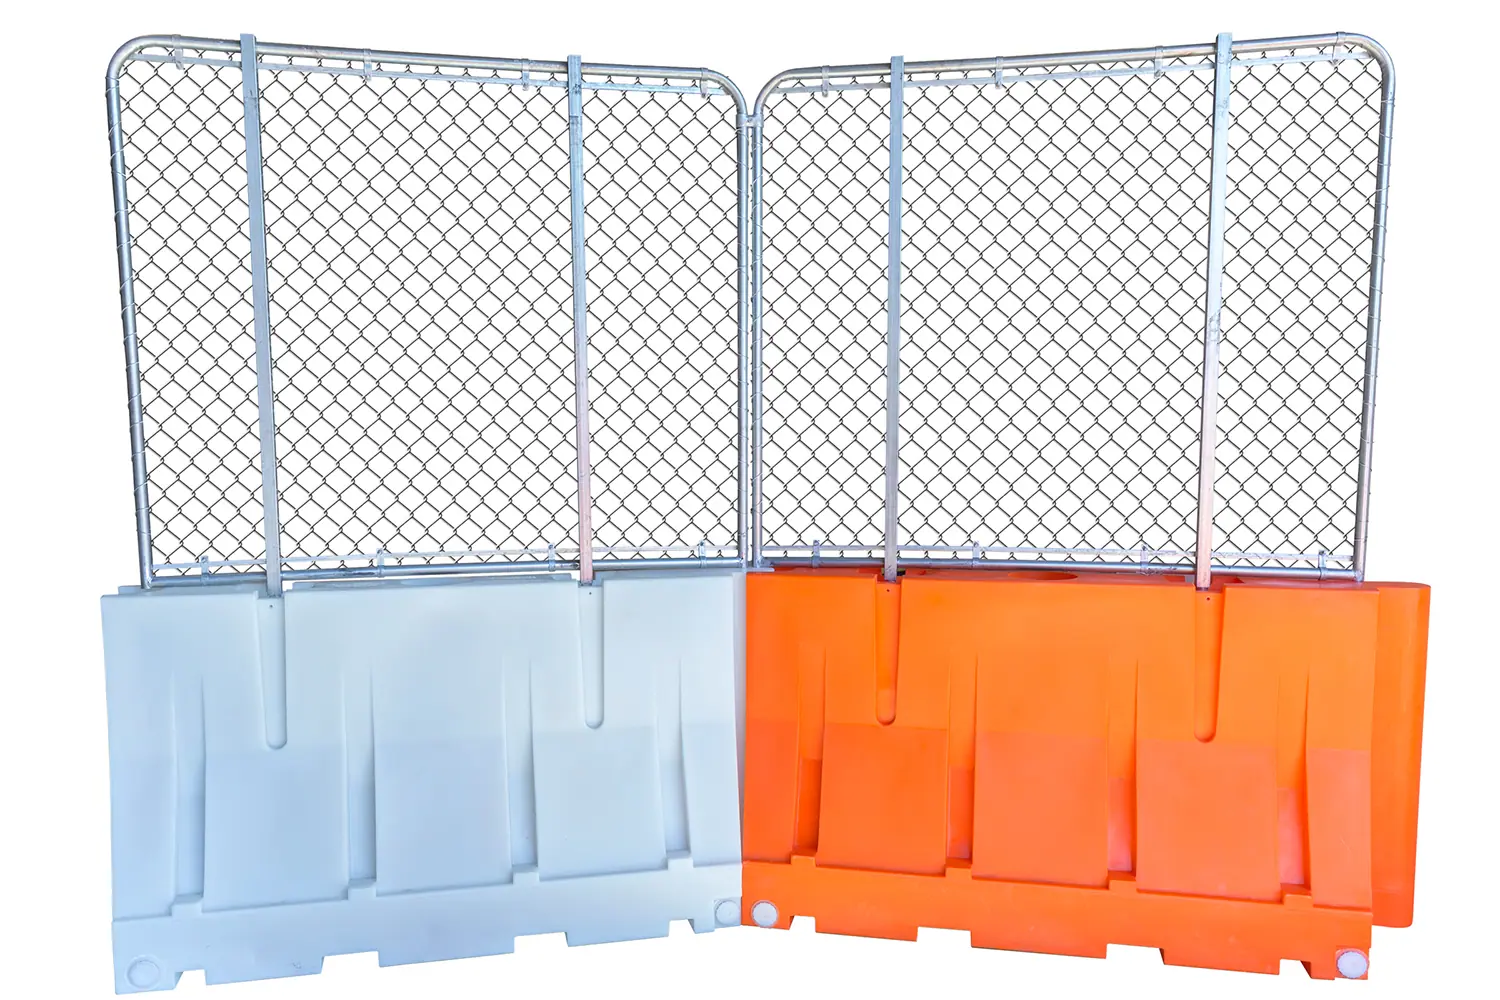 barricade fence panel integrates with OTW construction barricades to create a secure perimeter